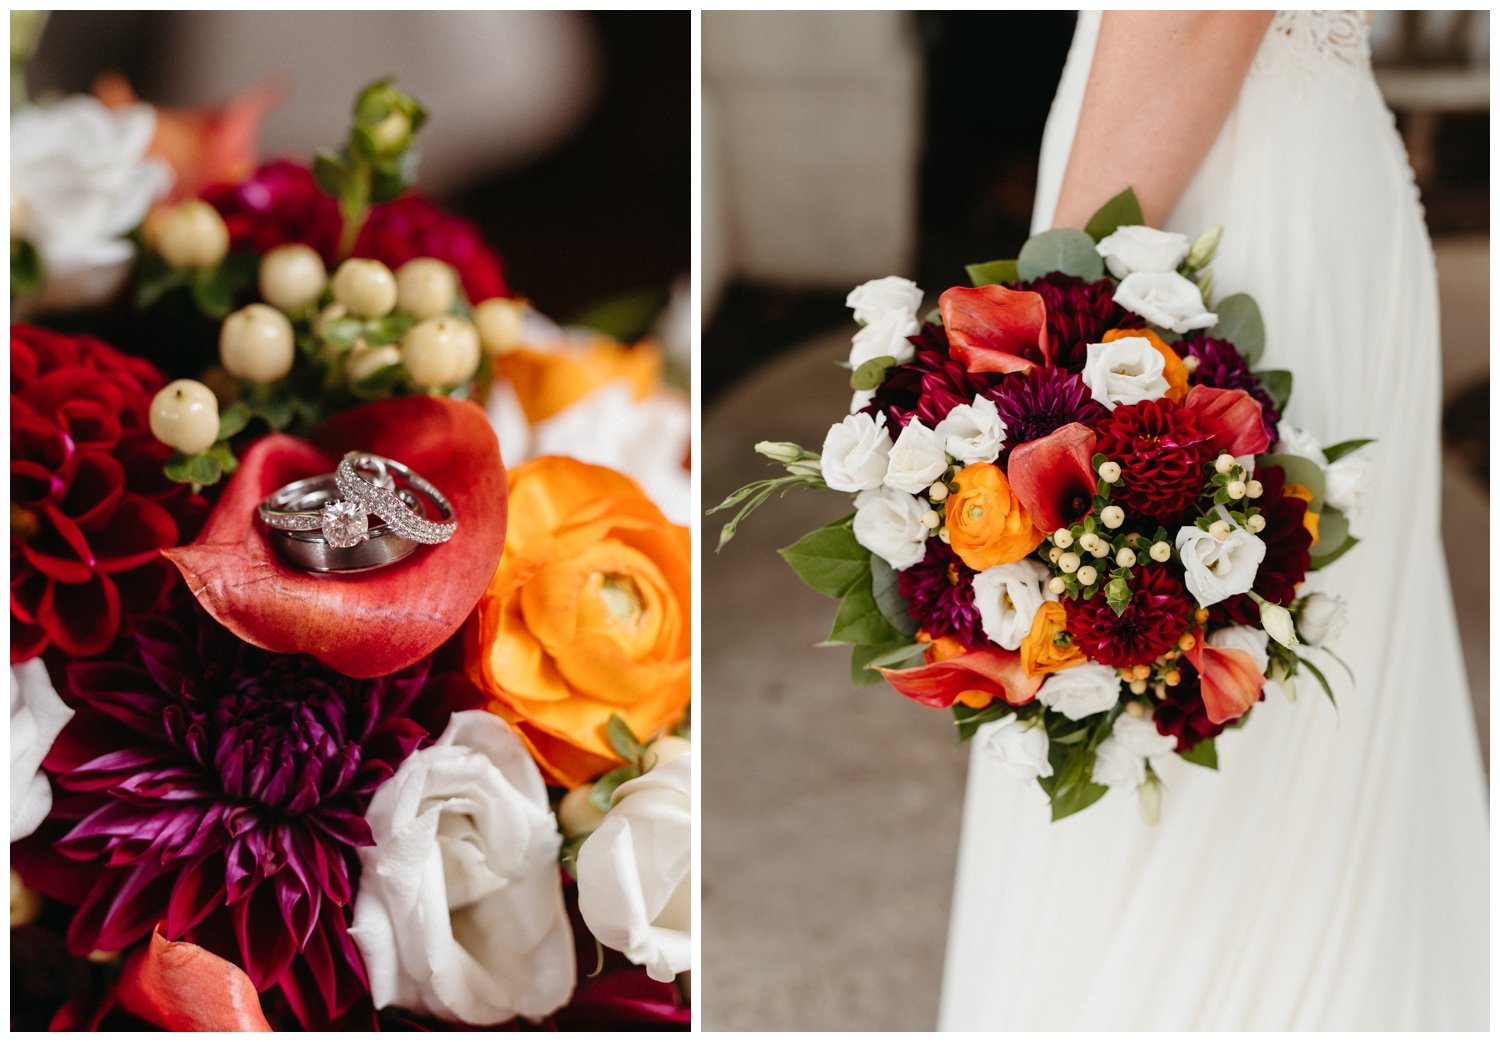 The rings are nestled in a red lily in the bride's bouquet for the intimate destination wedding